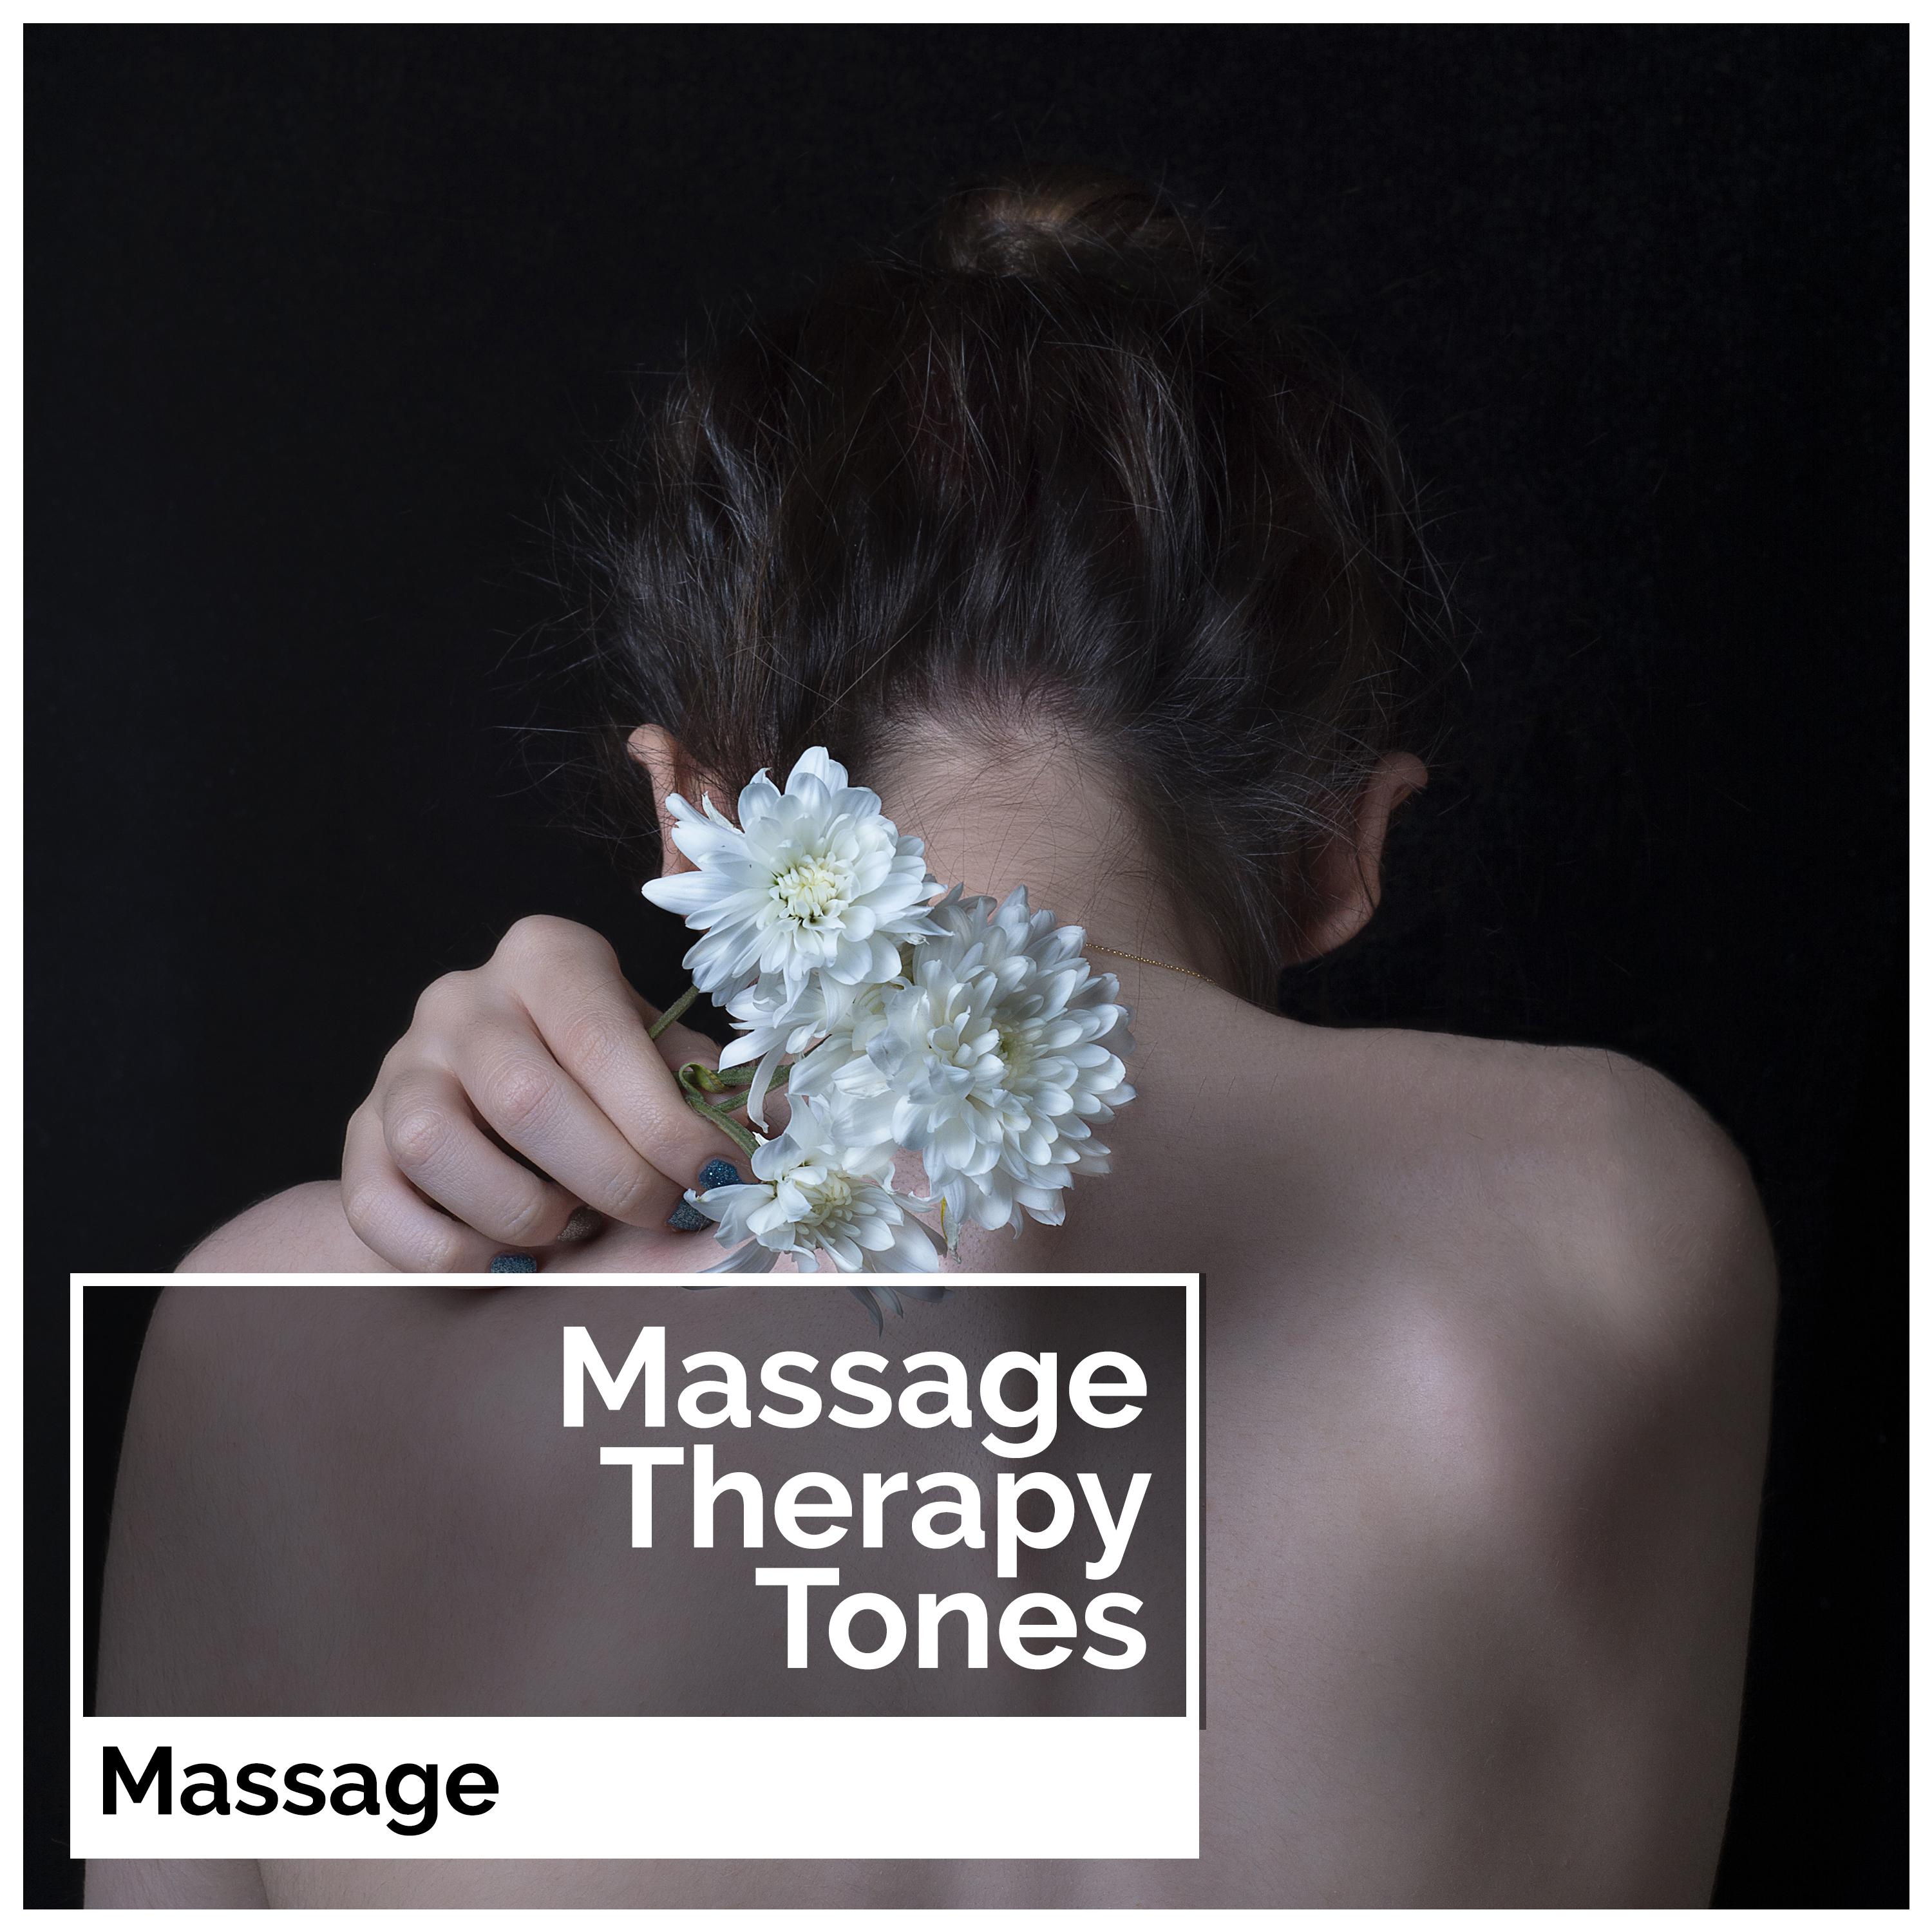 Massage Therapy Tones